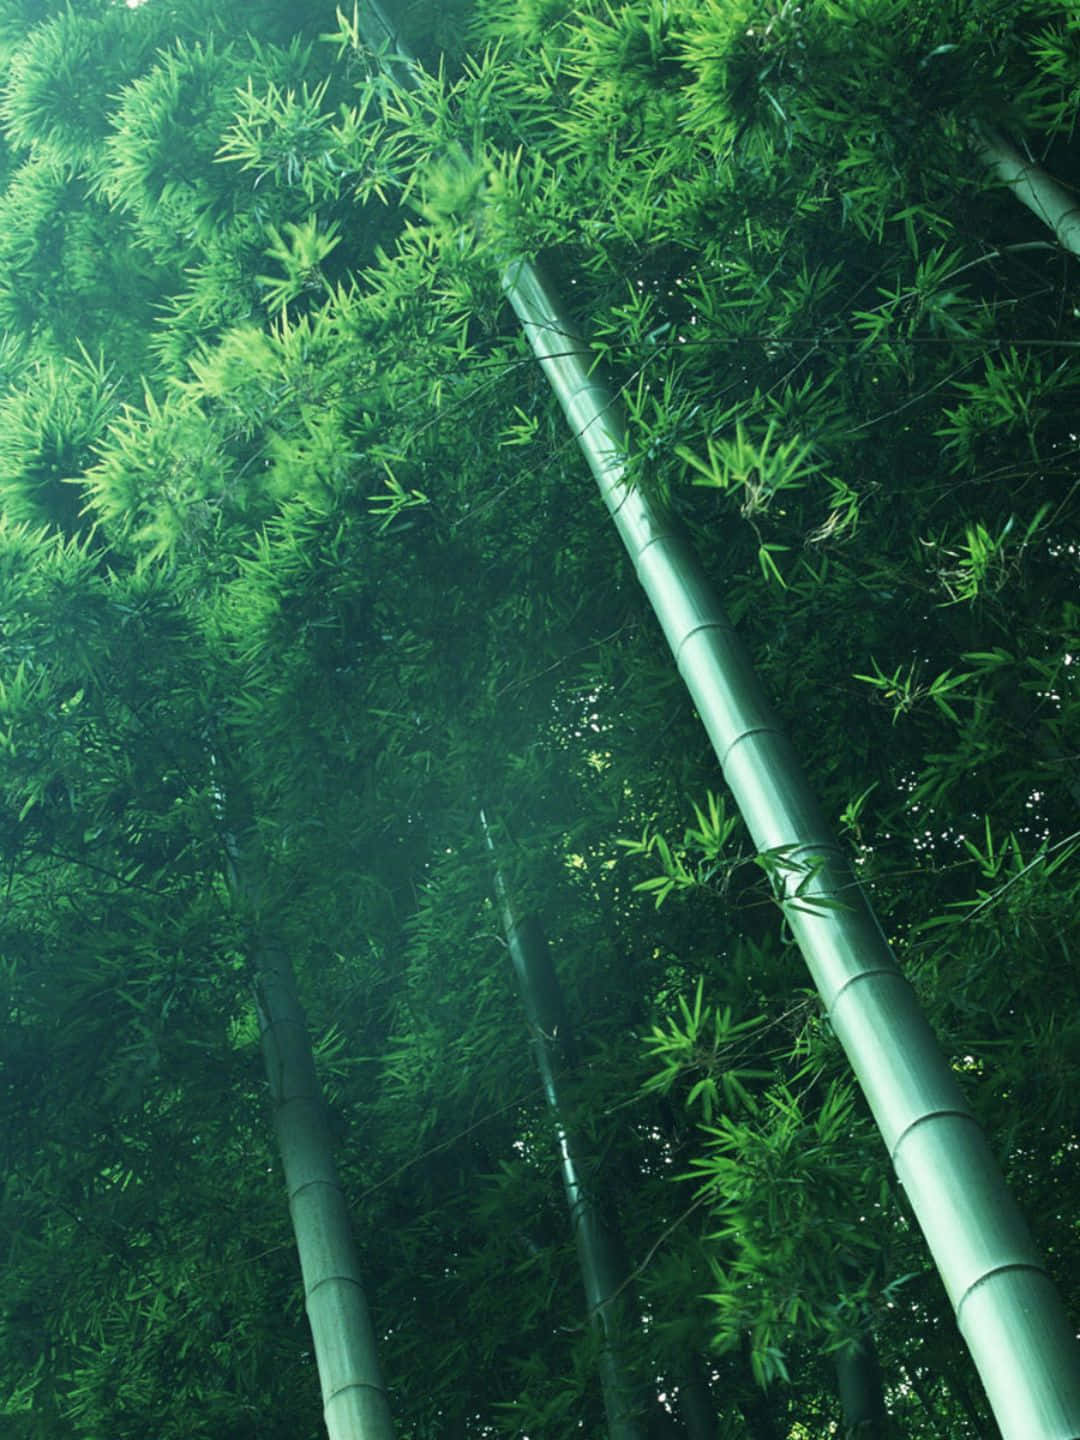 1440p Bamboo Background Bamboo Trees With Leaves